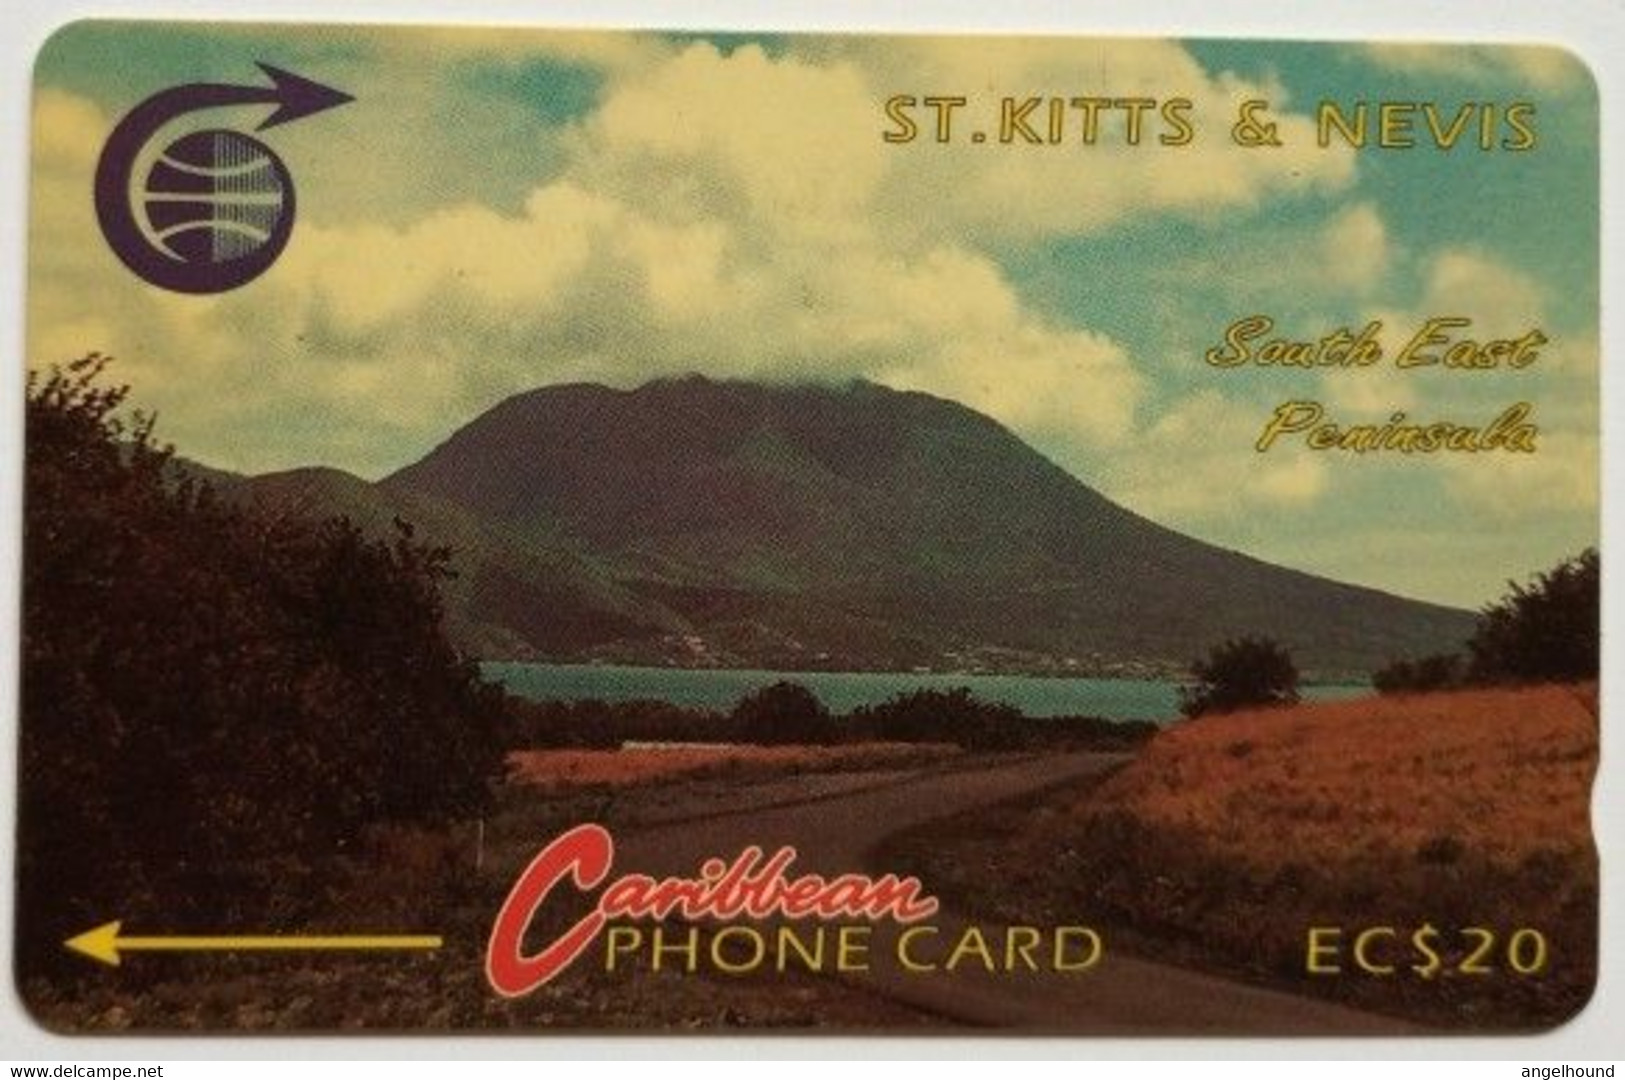 St. Kitts And Nevis  EC$20  3CSKD  " South East Peninsula " - St. Kitts & Nevis